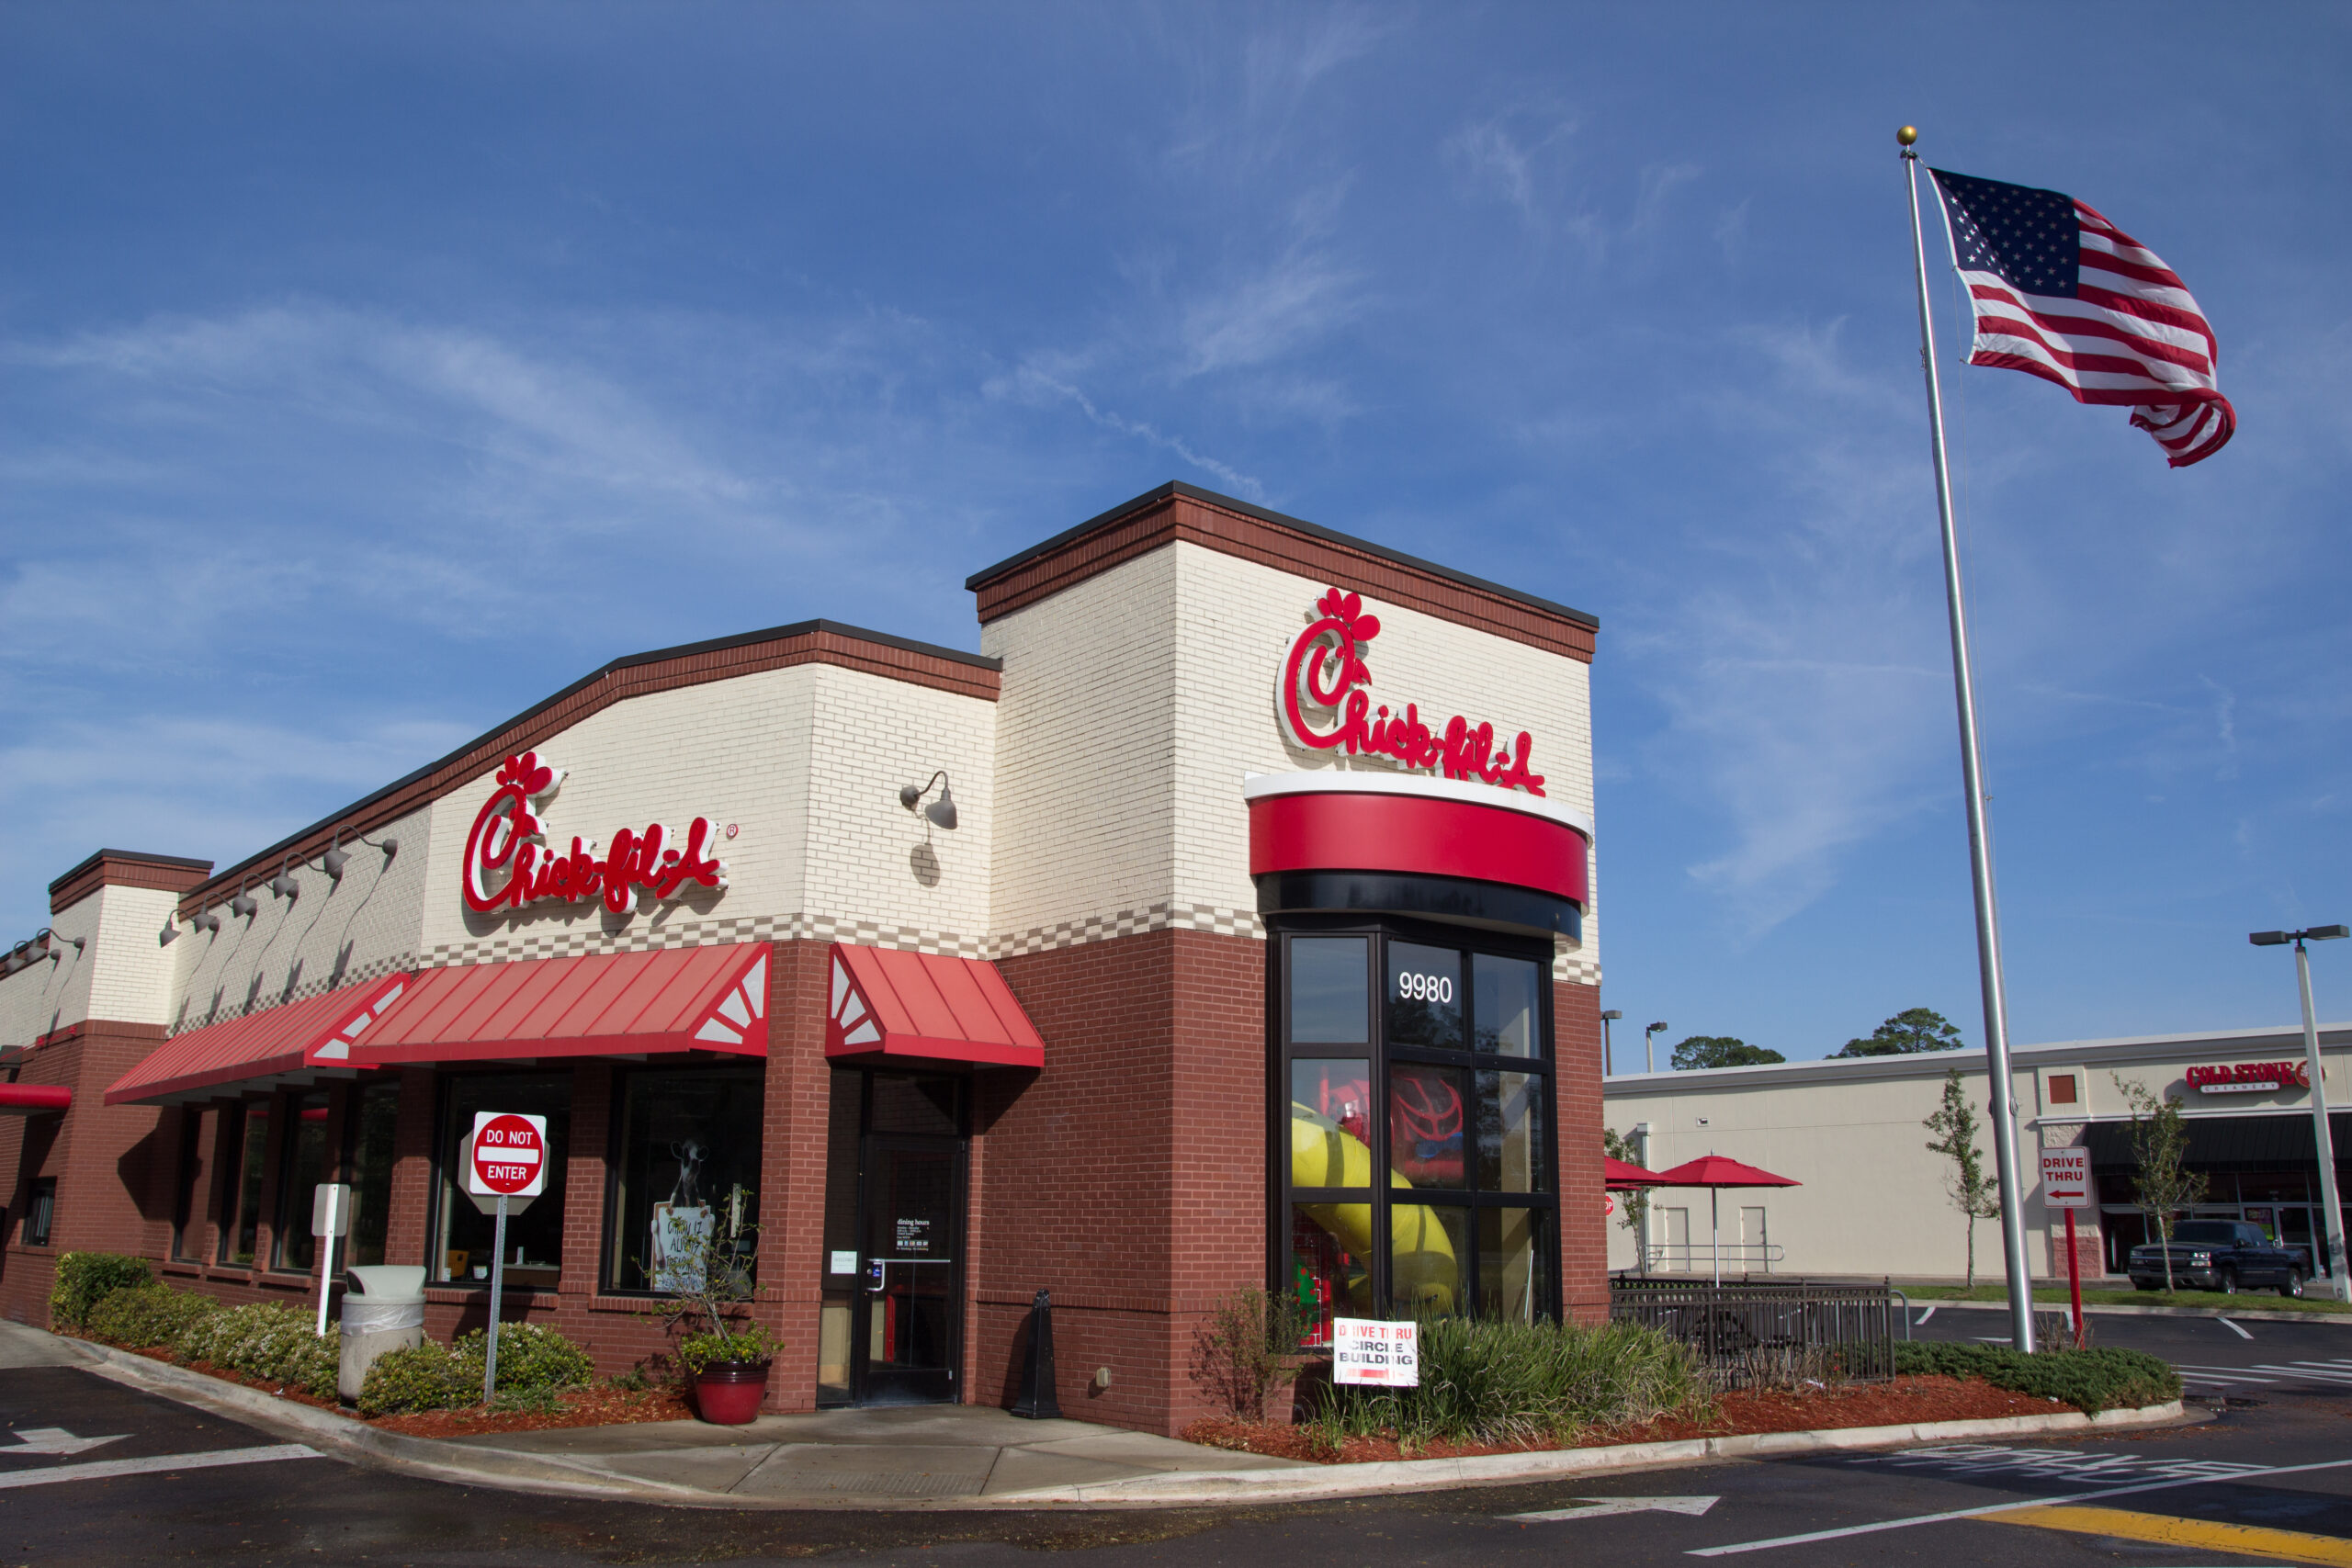 Chick-fil-A Location Bans All Kids Under 16 From Dining Room Without Parent